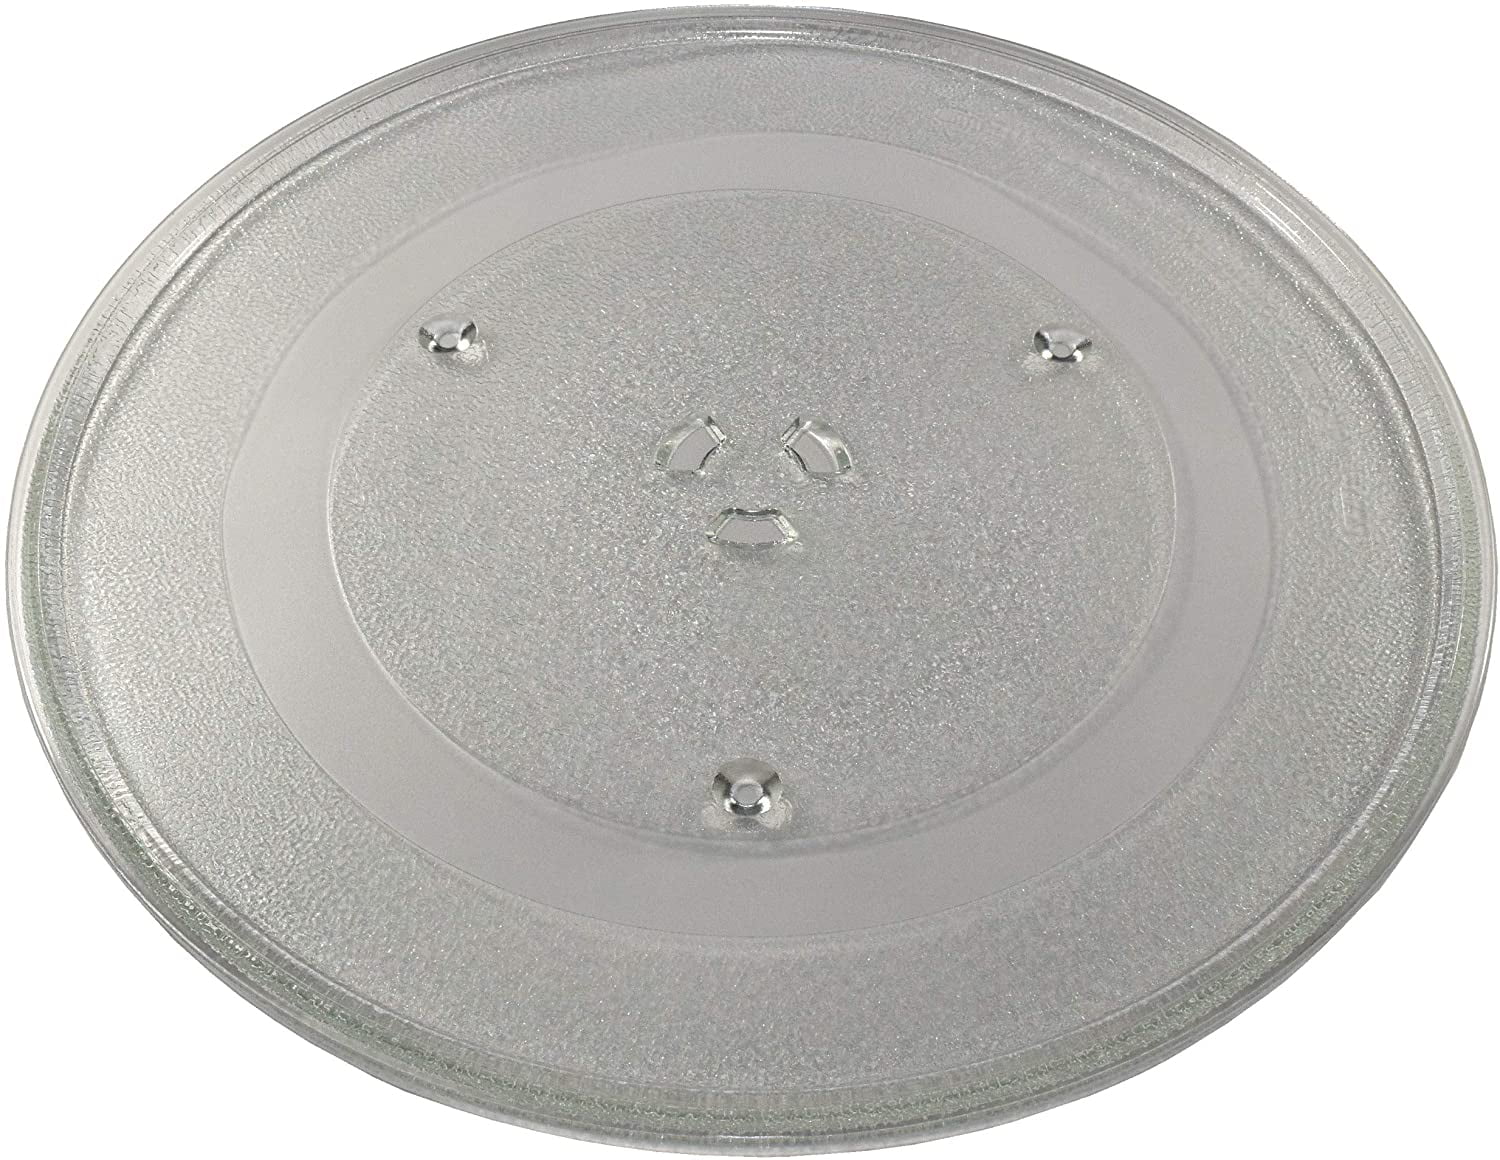 HQRP 12.5" Glass Turntable Tray for Frigidaire Microwave Oven Cooking Plate 